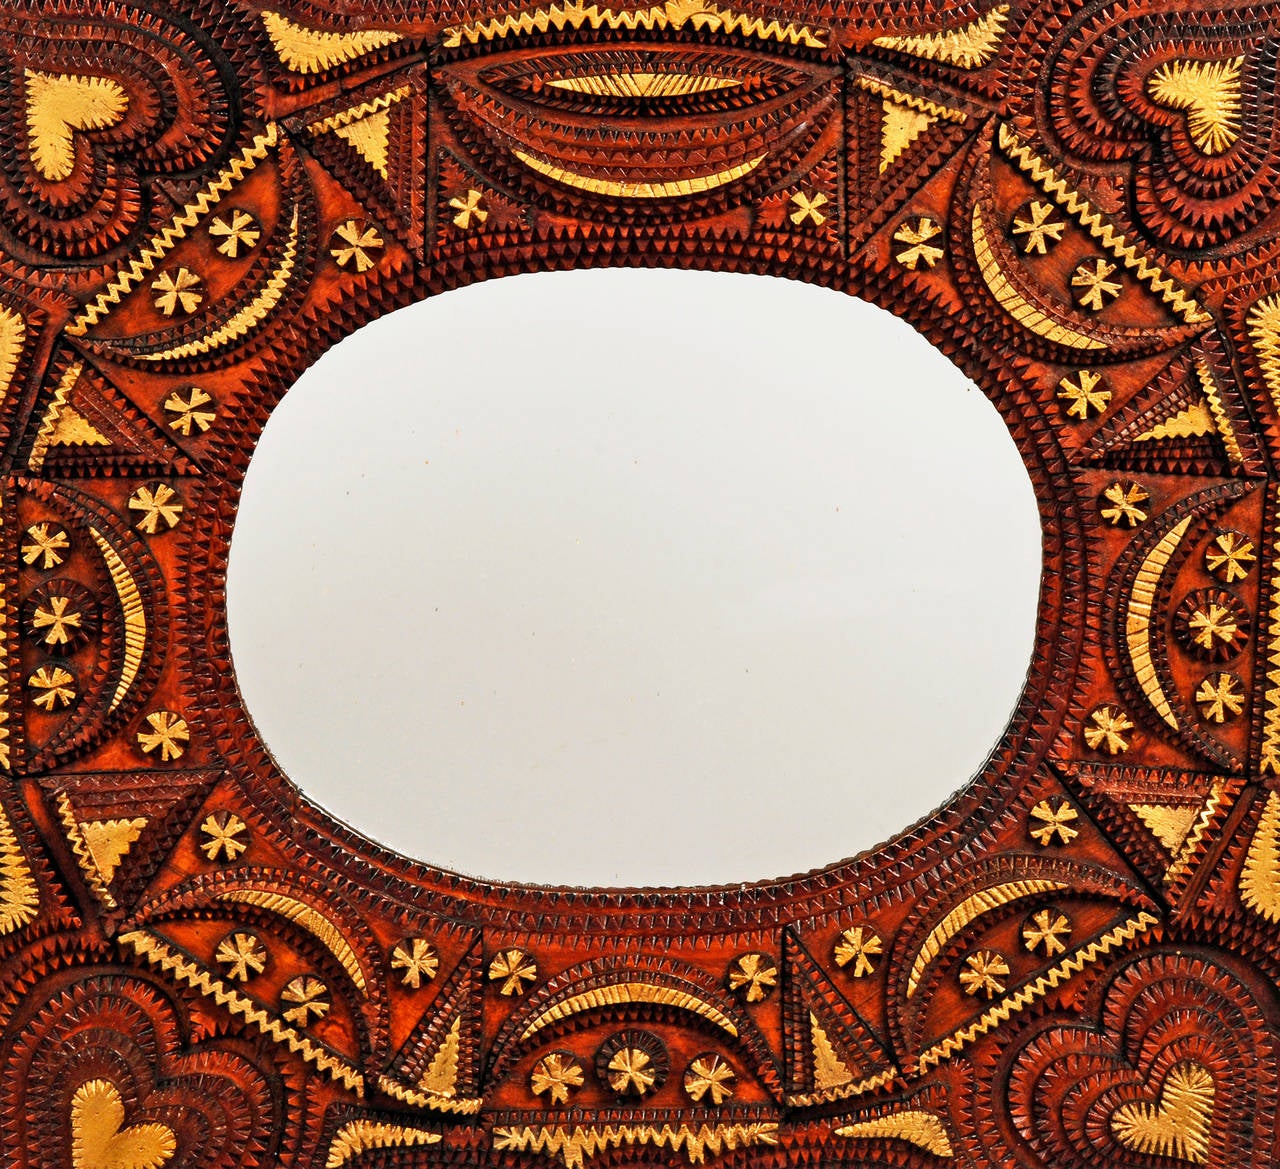 Superb Tramp Art Mirror with Hearts In Excellent Condition For Sale In Manalapan, NJ